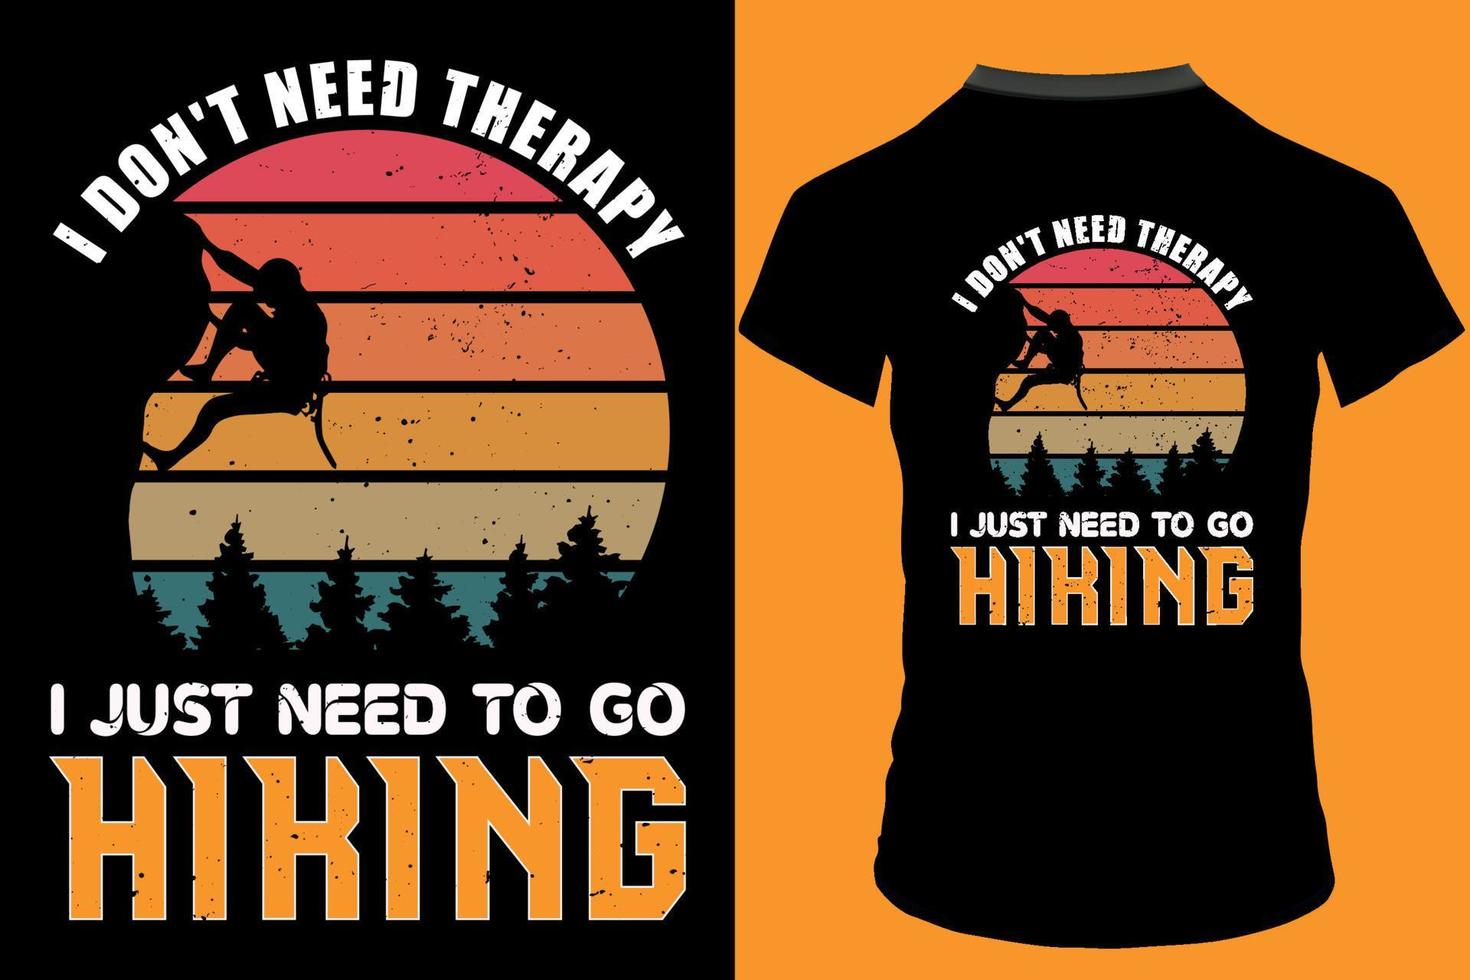 i don't need therapy i just need to go hiking quote retro t-shirt design, Illustration vector, Hiking t shirt design, Outdoor adventure. vector